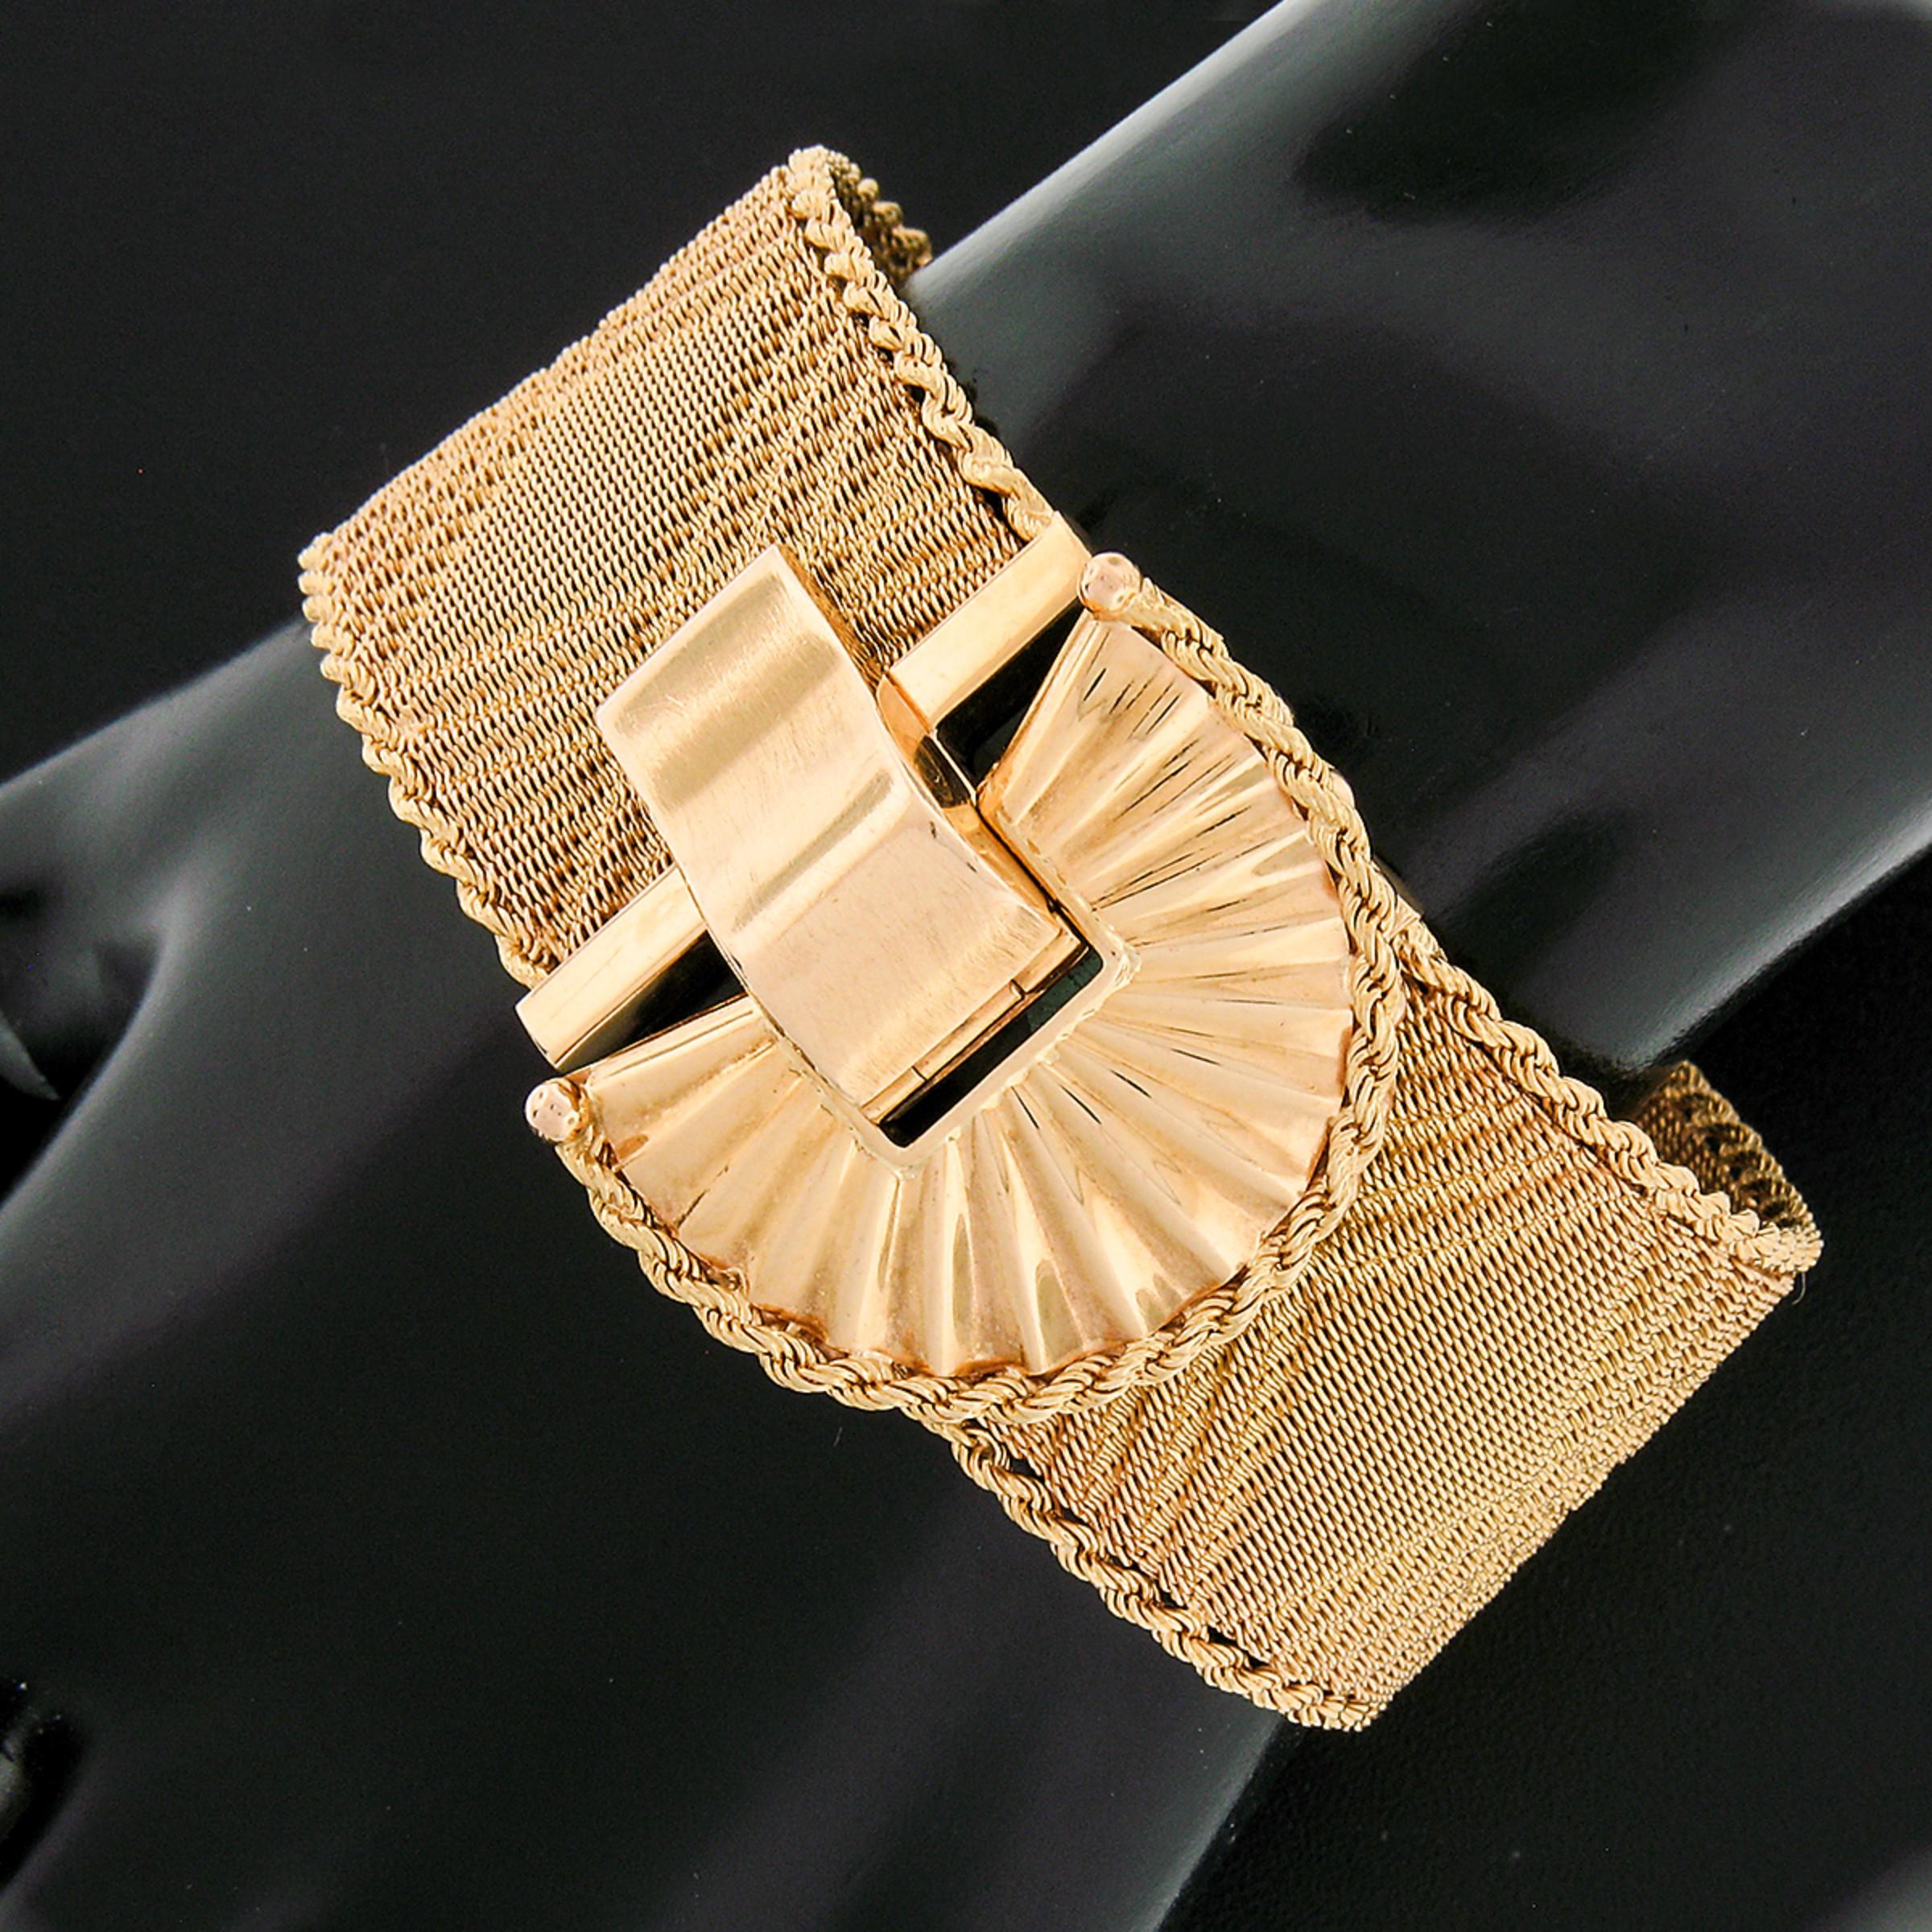 You are looking at a magnificent vintage strap bracelet that was crafted in Italy from solid 18k yellow gold. This wide strap is very well constructed from woven mesh with a silky and super flexible feel on the wrist. The mesh strap is embedded with